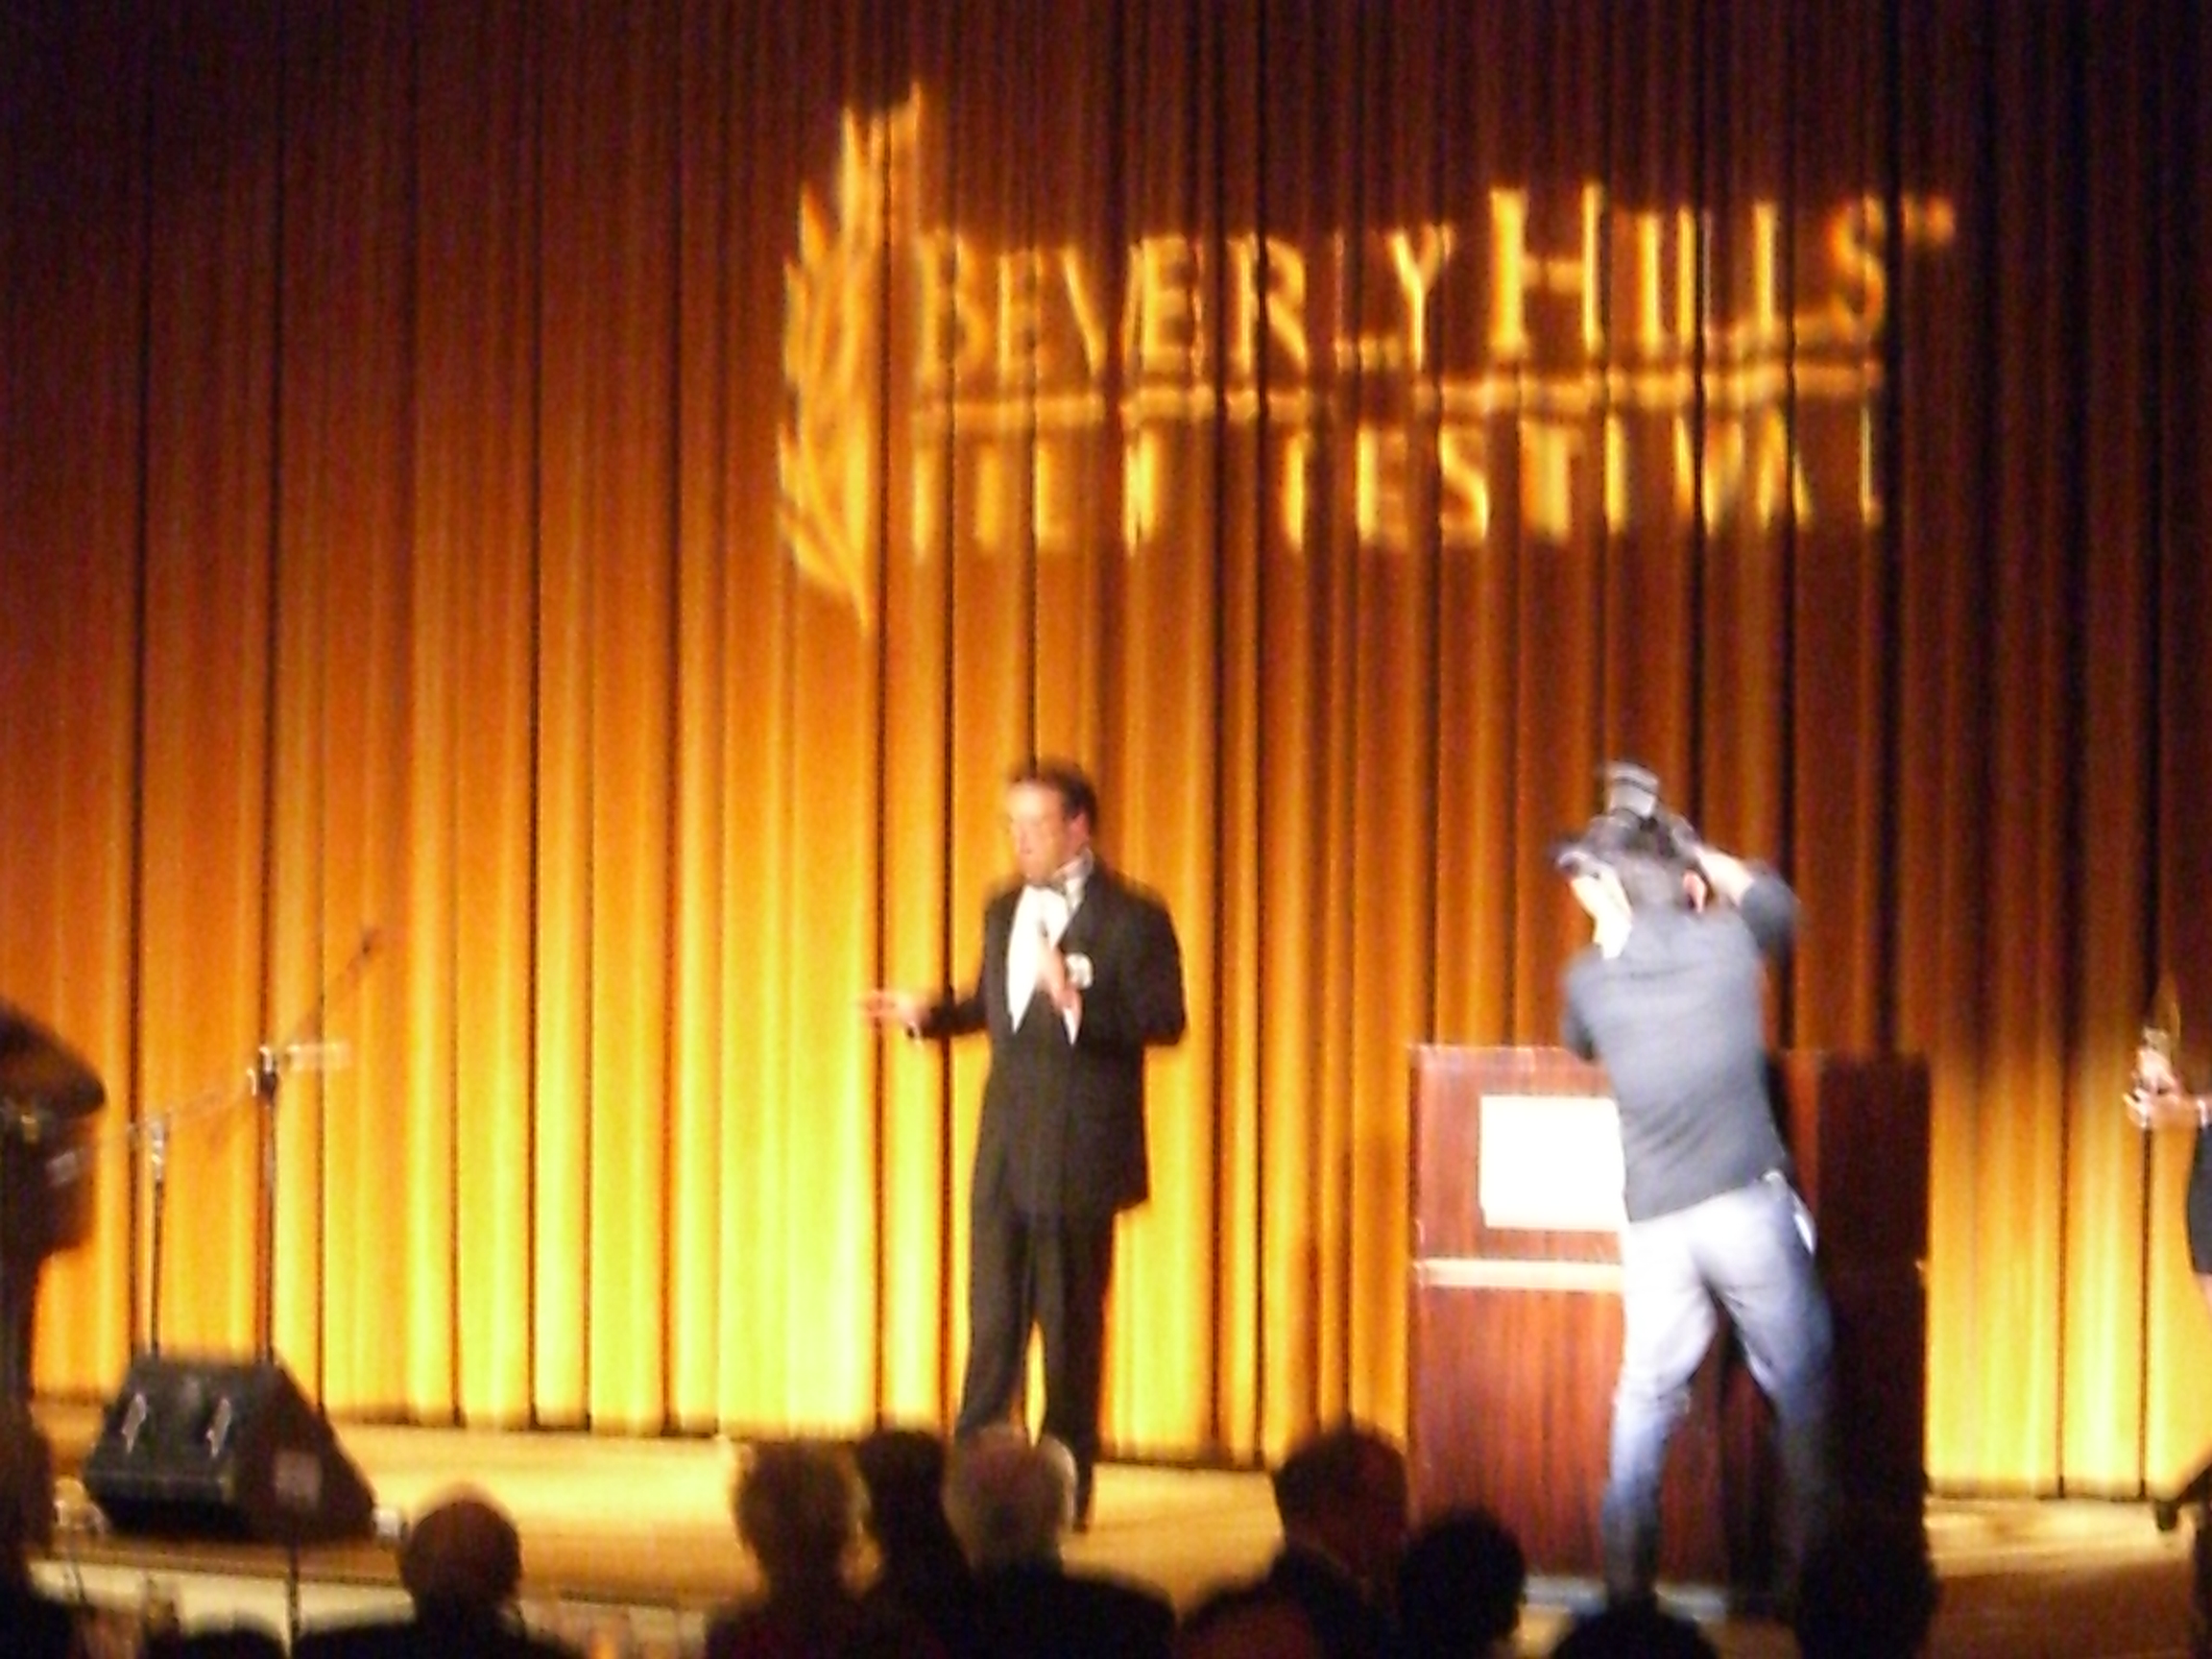 David Kane being honored at the Beverly Hills Film Festival.